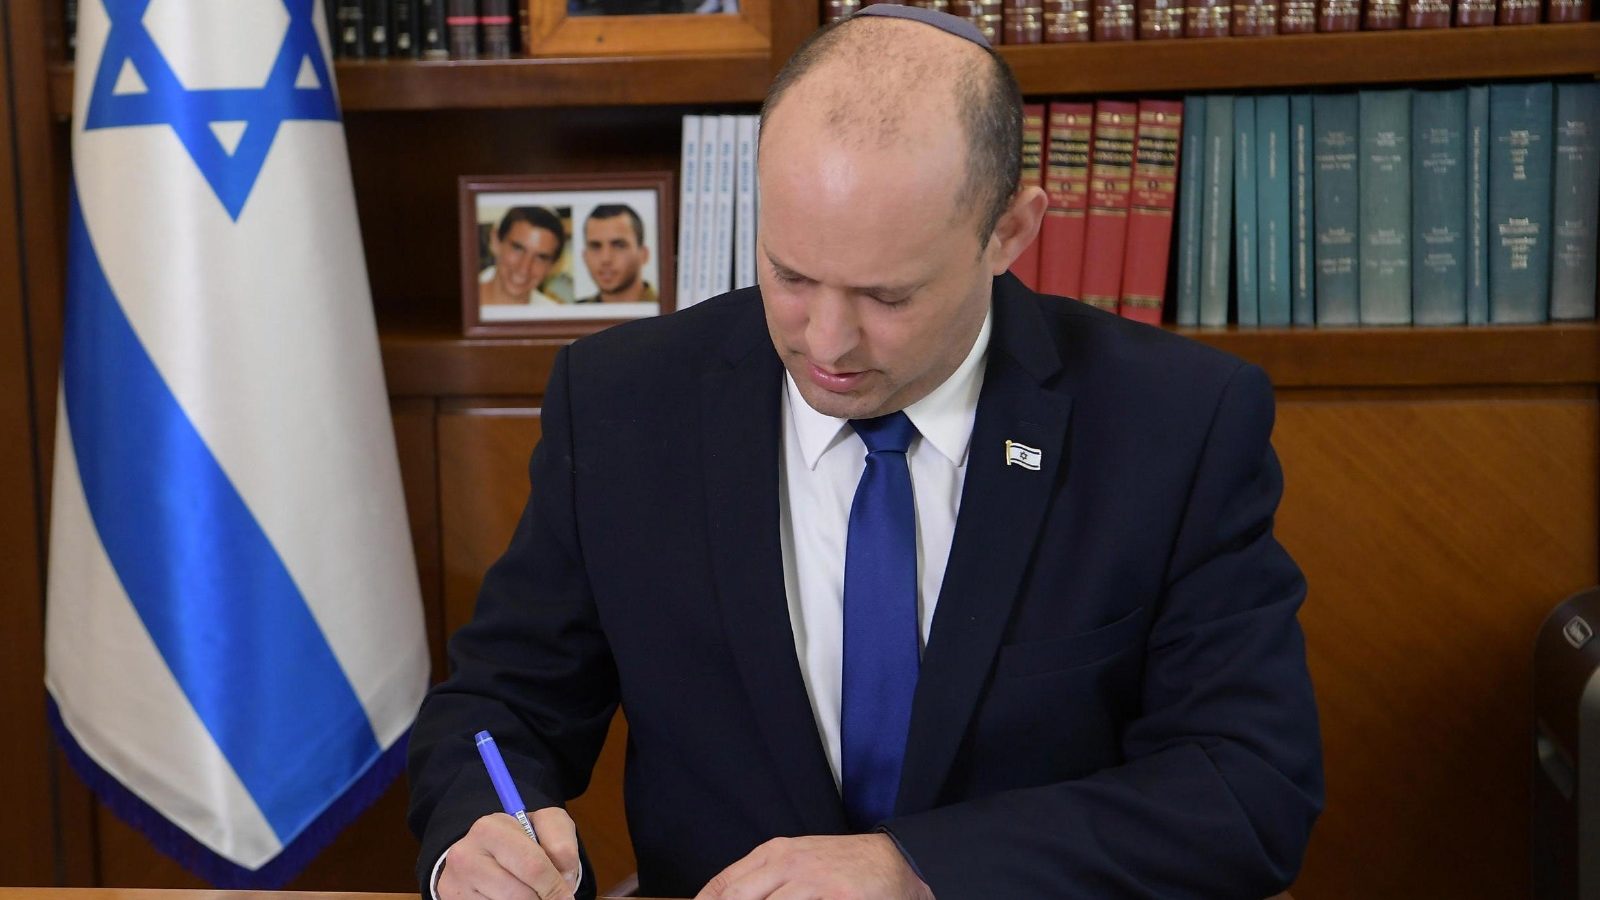 Israel’s Bennett Considered Weak and Uncharismatic by Arab World, Says Expert